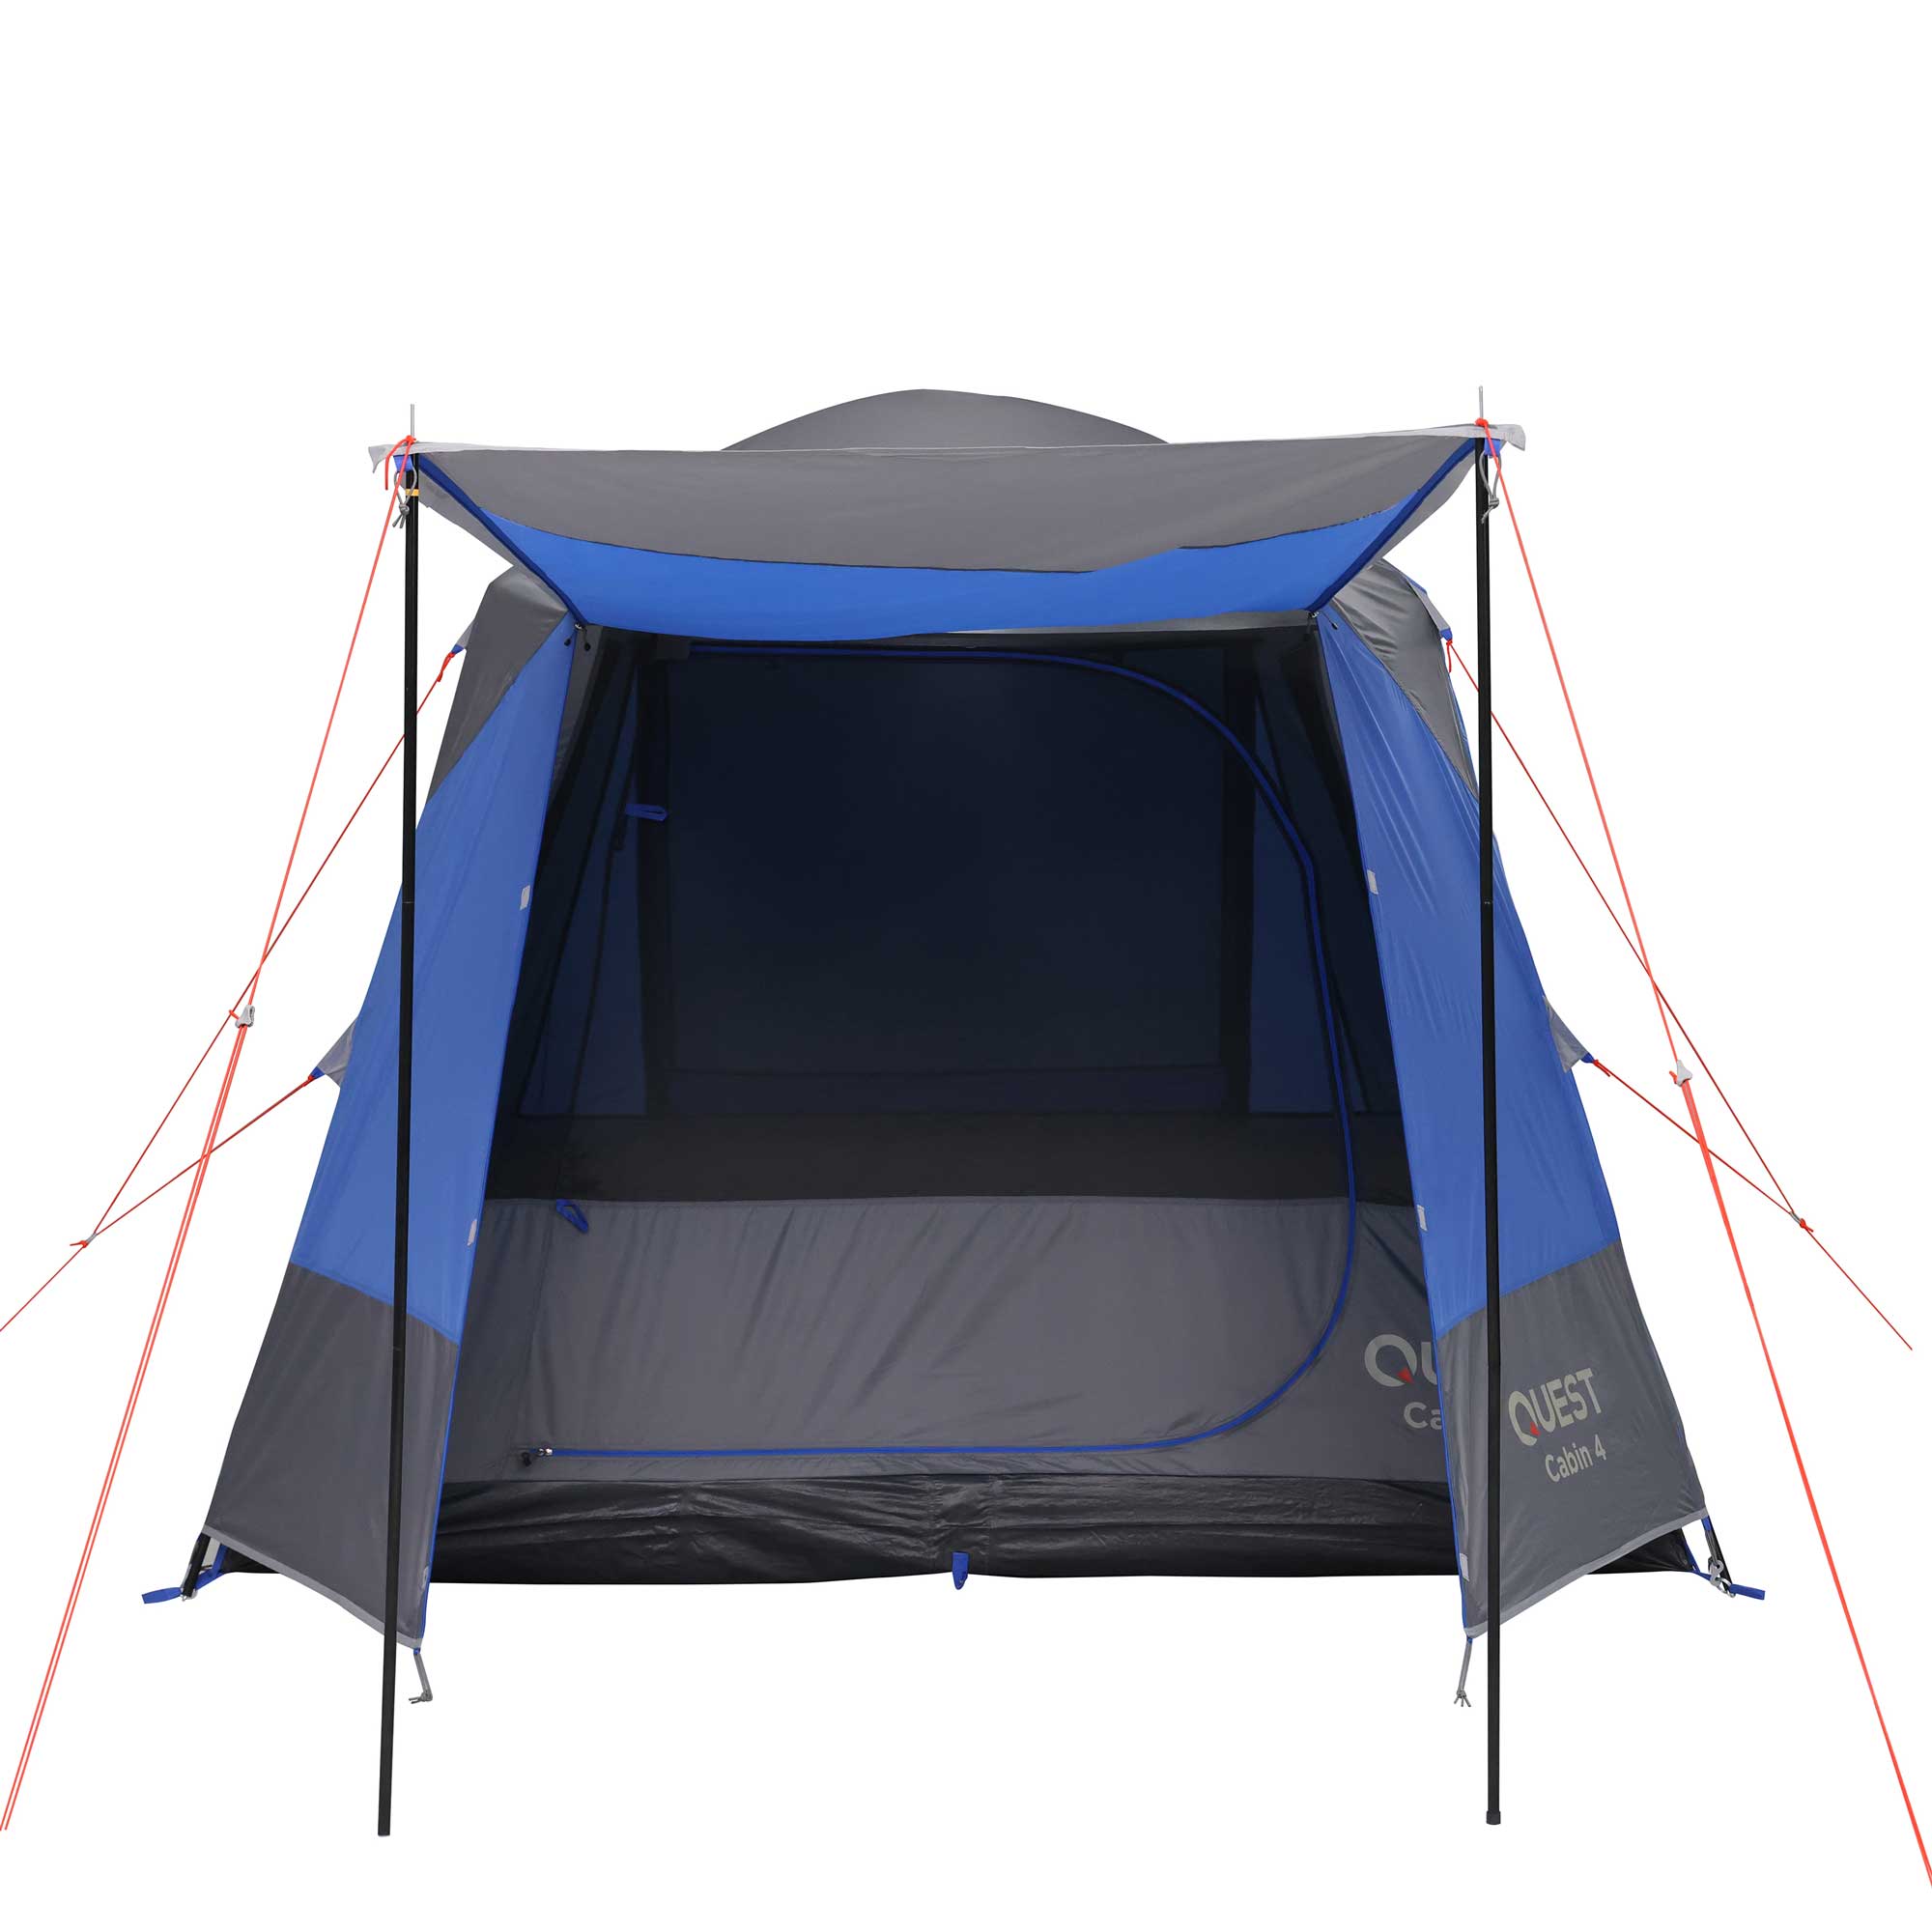 Quest Straight Wall Cabin Tent - 4 Person